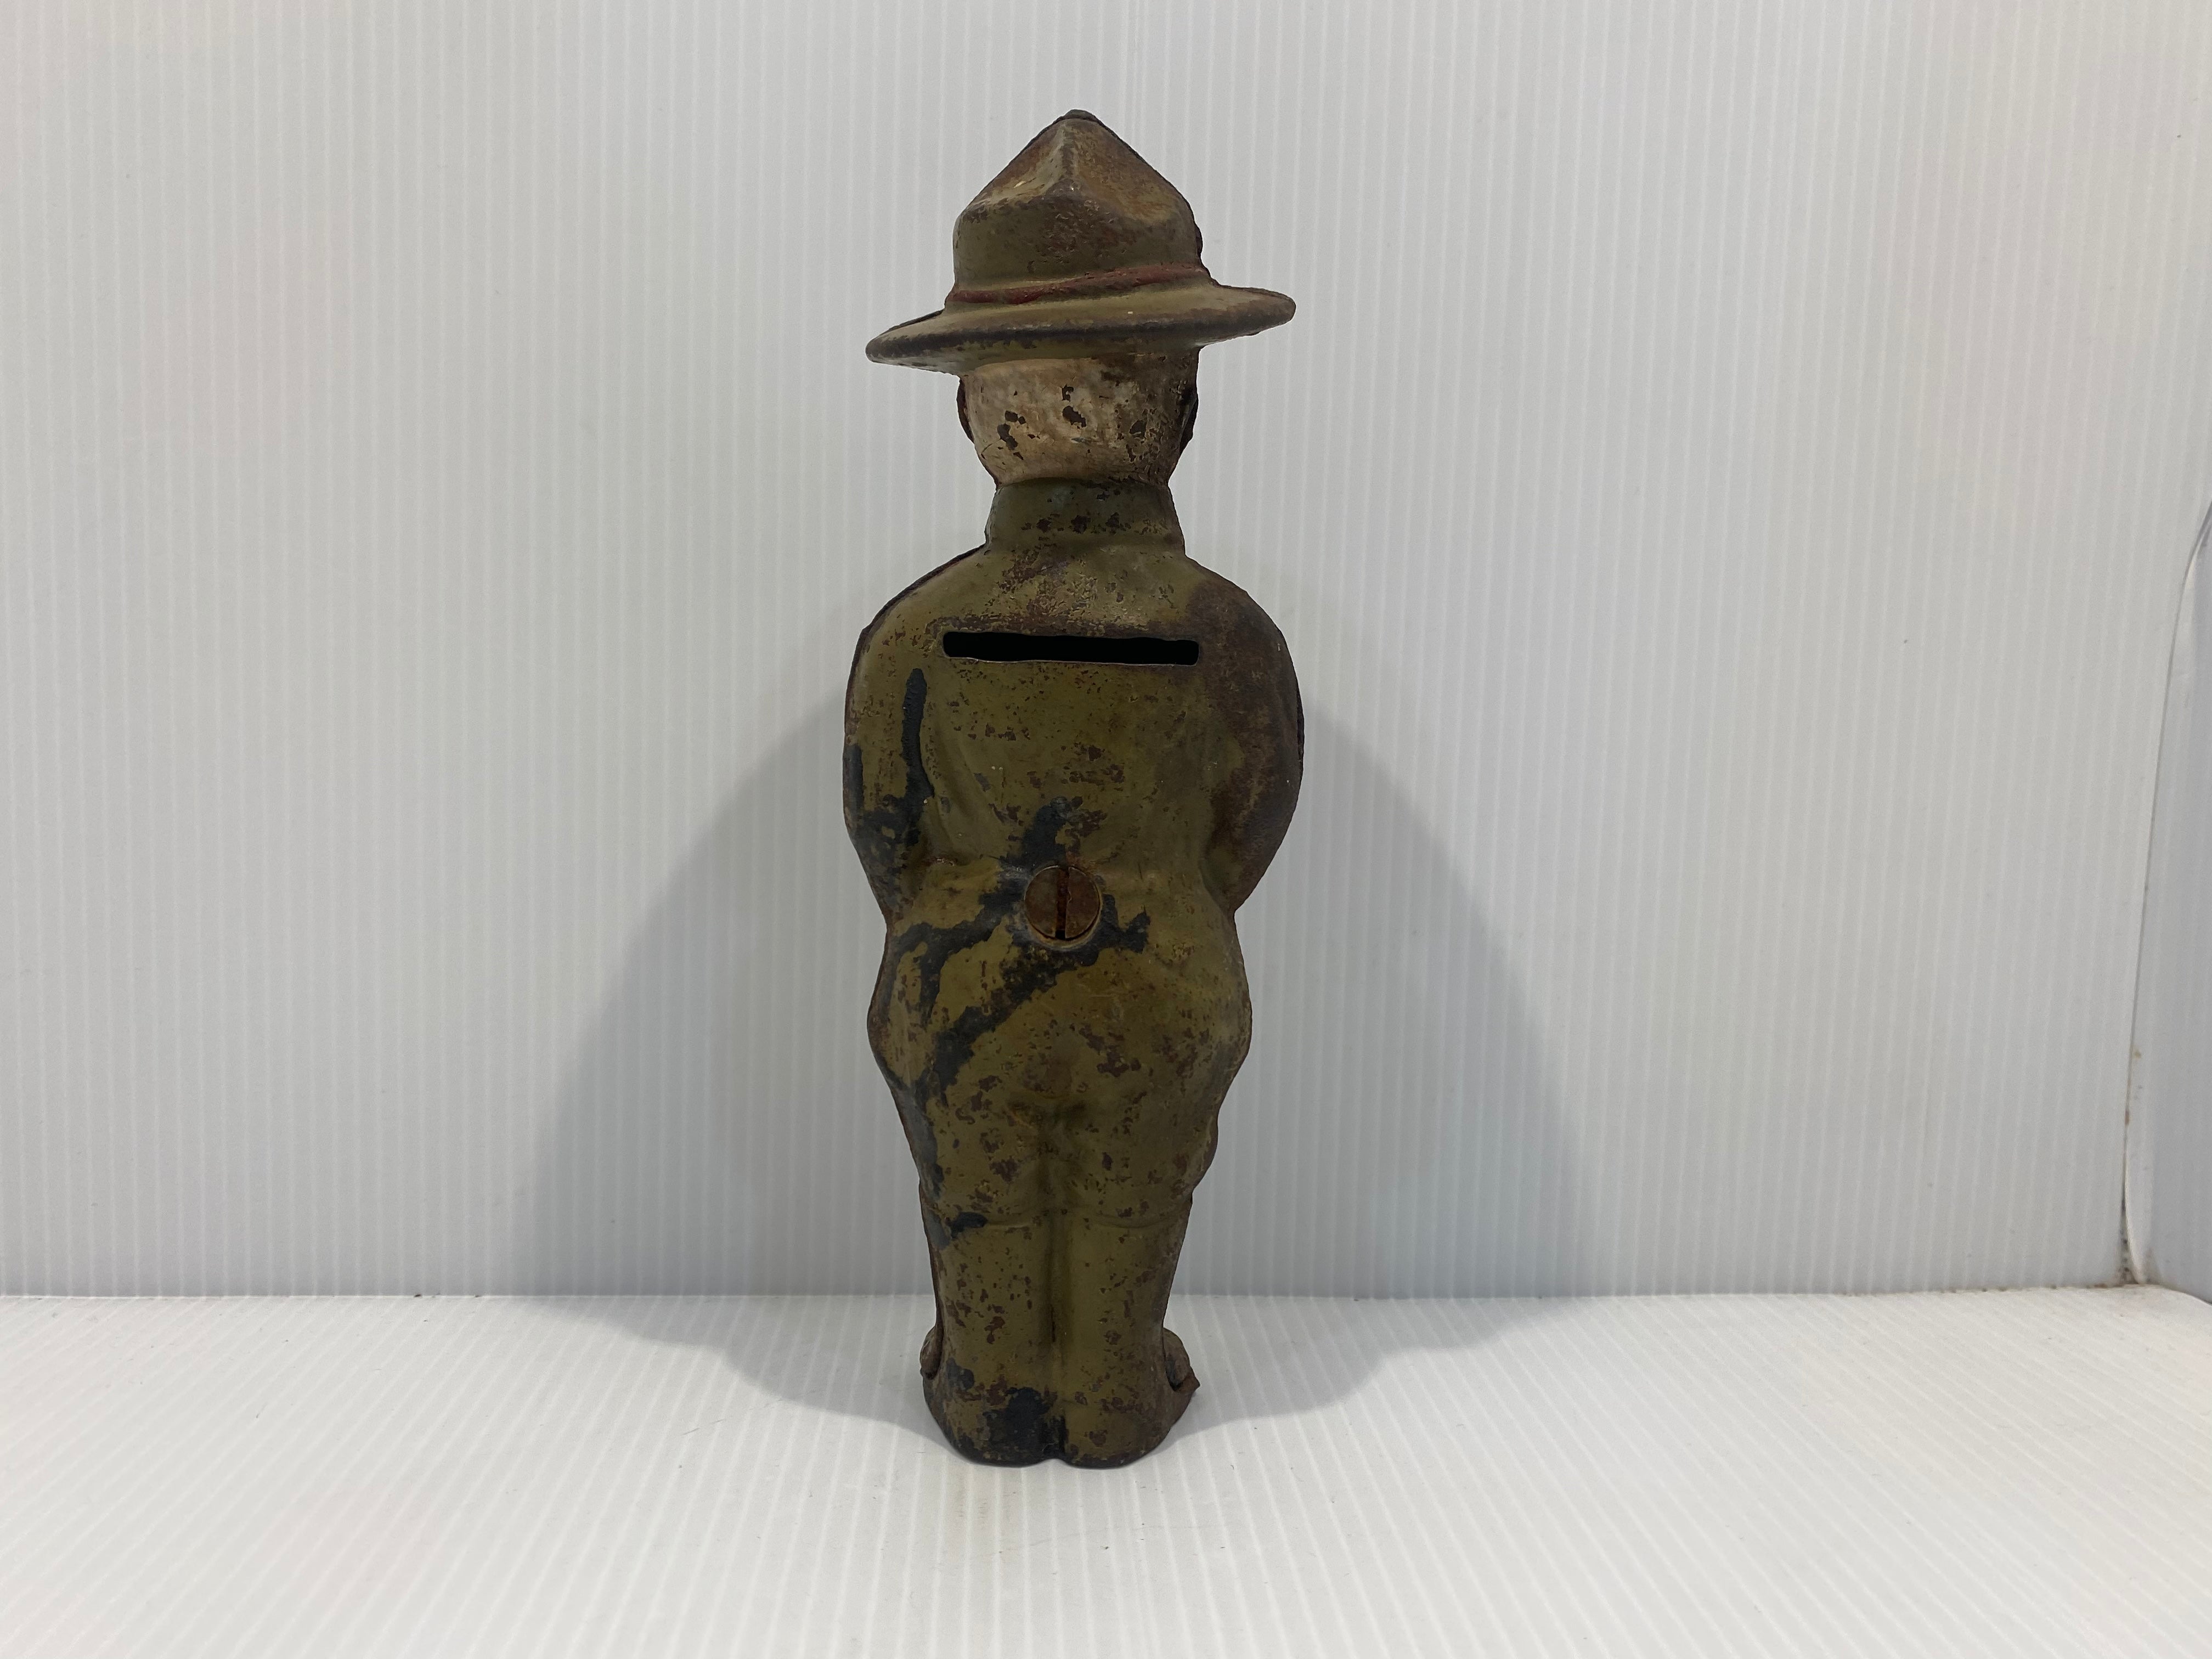 Antique Cast Iron Doughboy Soldier Still Penny Bank